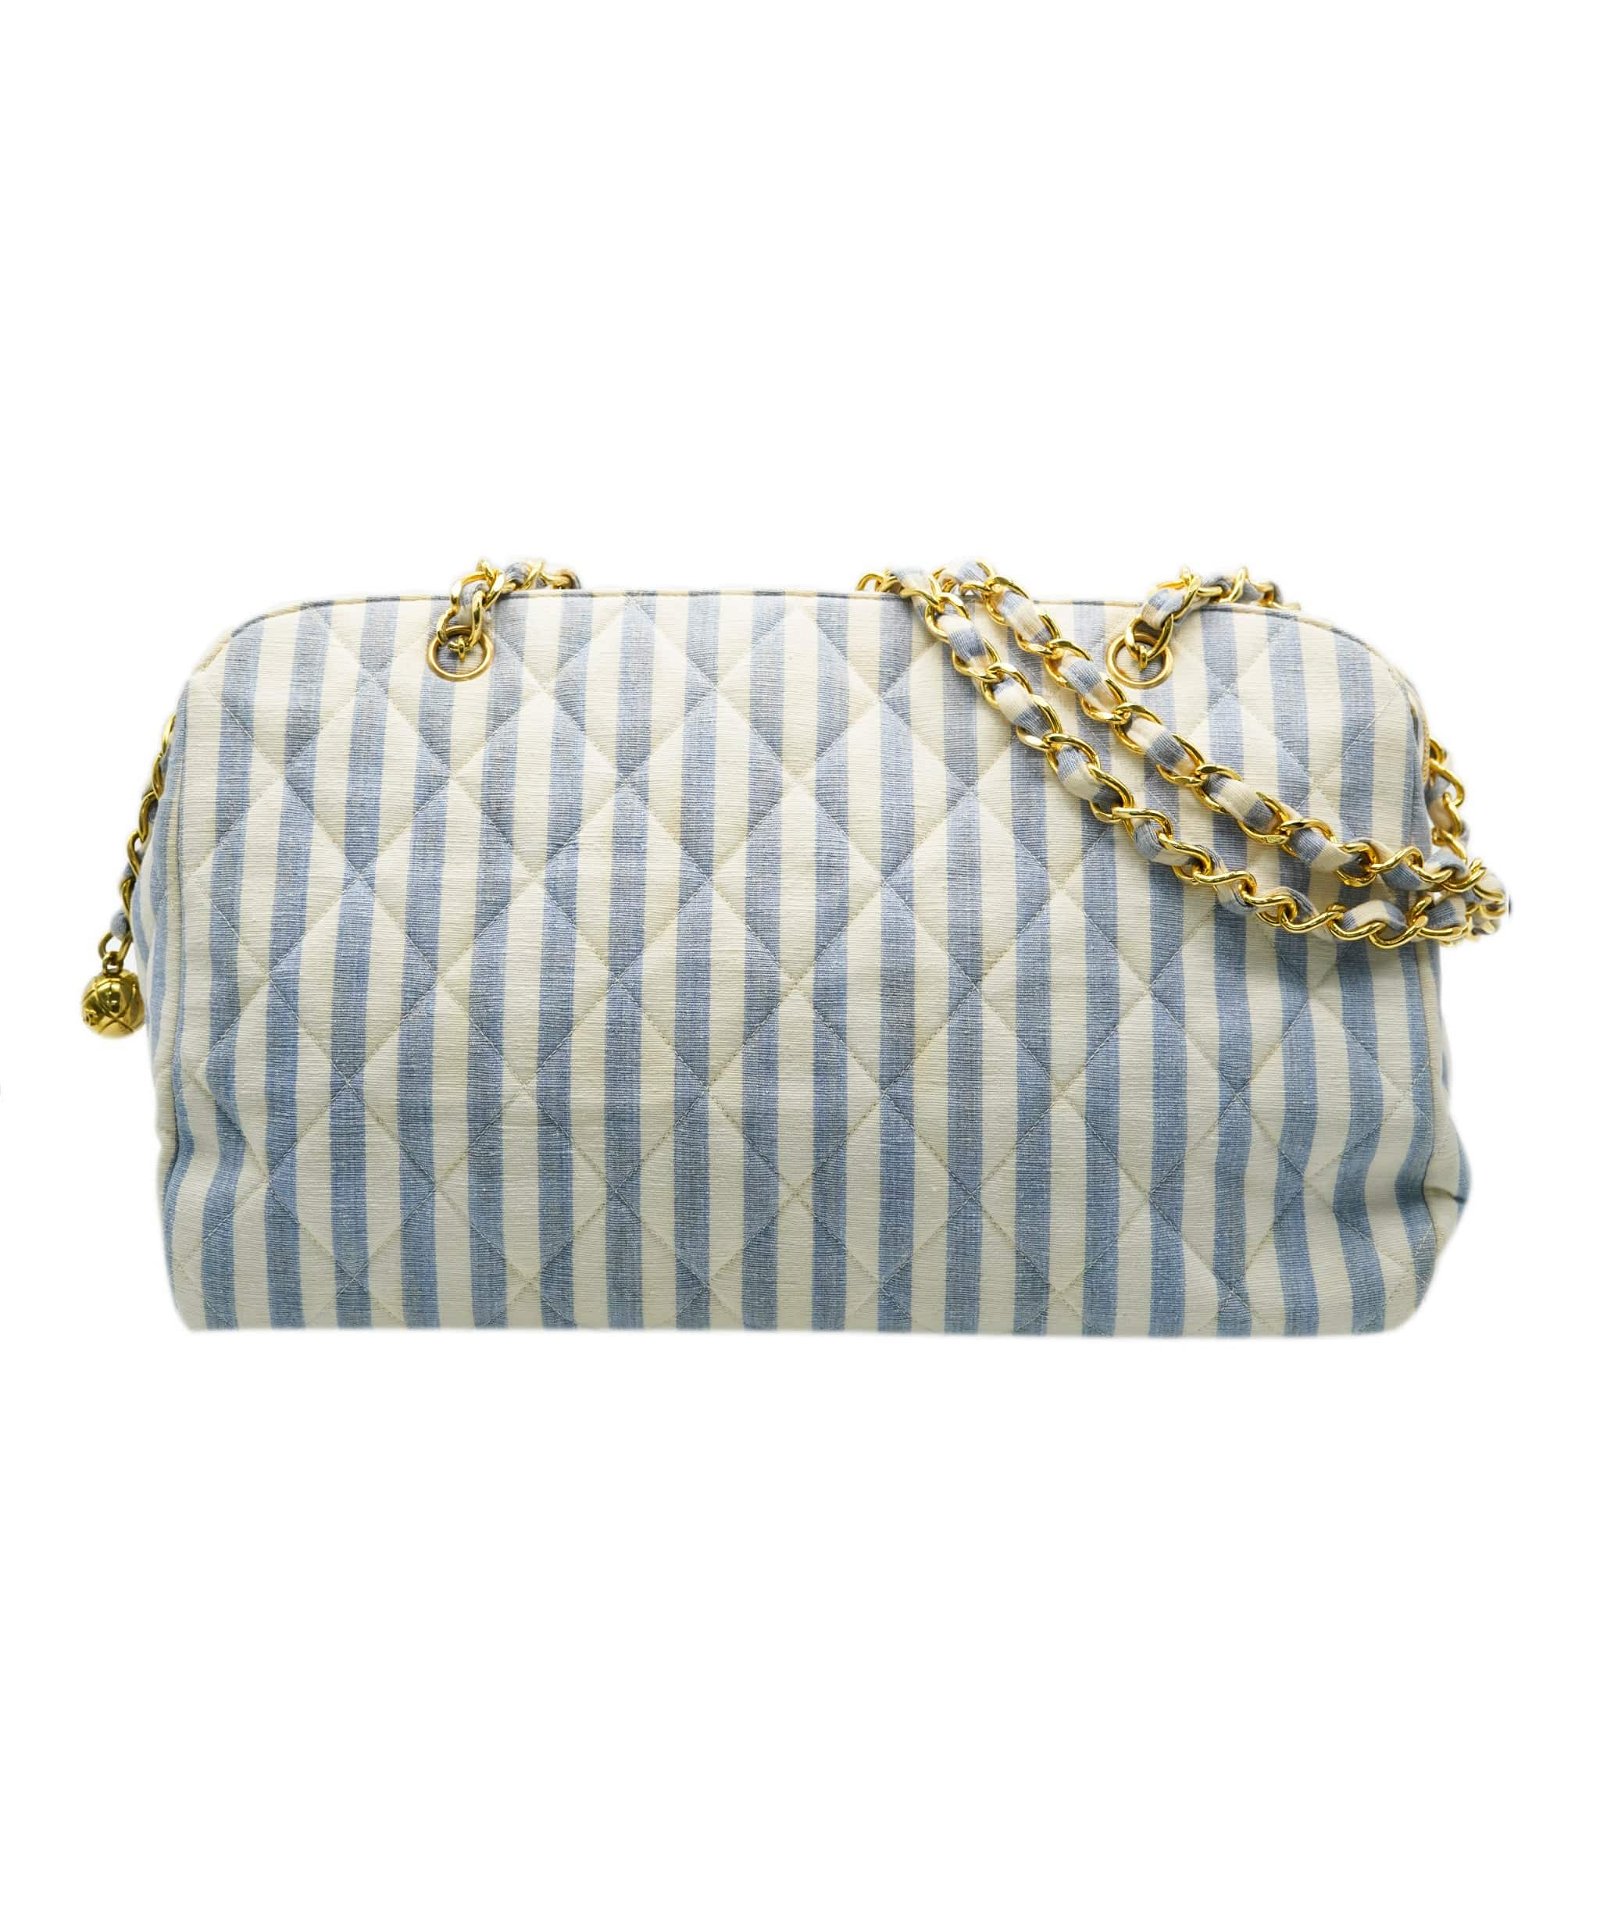 Image of Chanel Striped Canvas Tote Bag CC 24k Gilded Hardware AGC1663